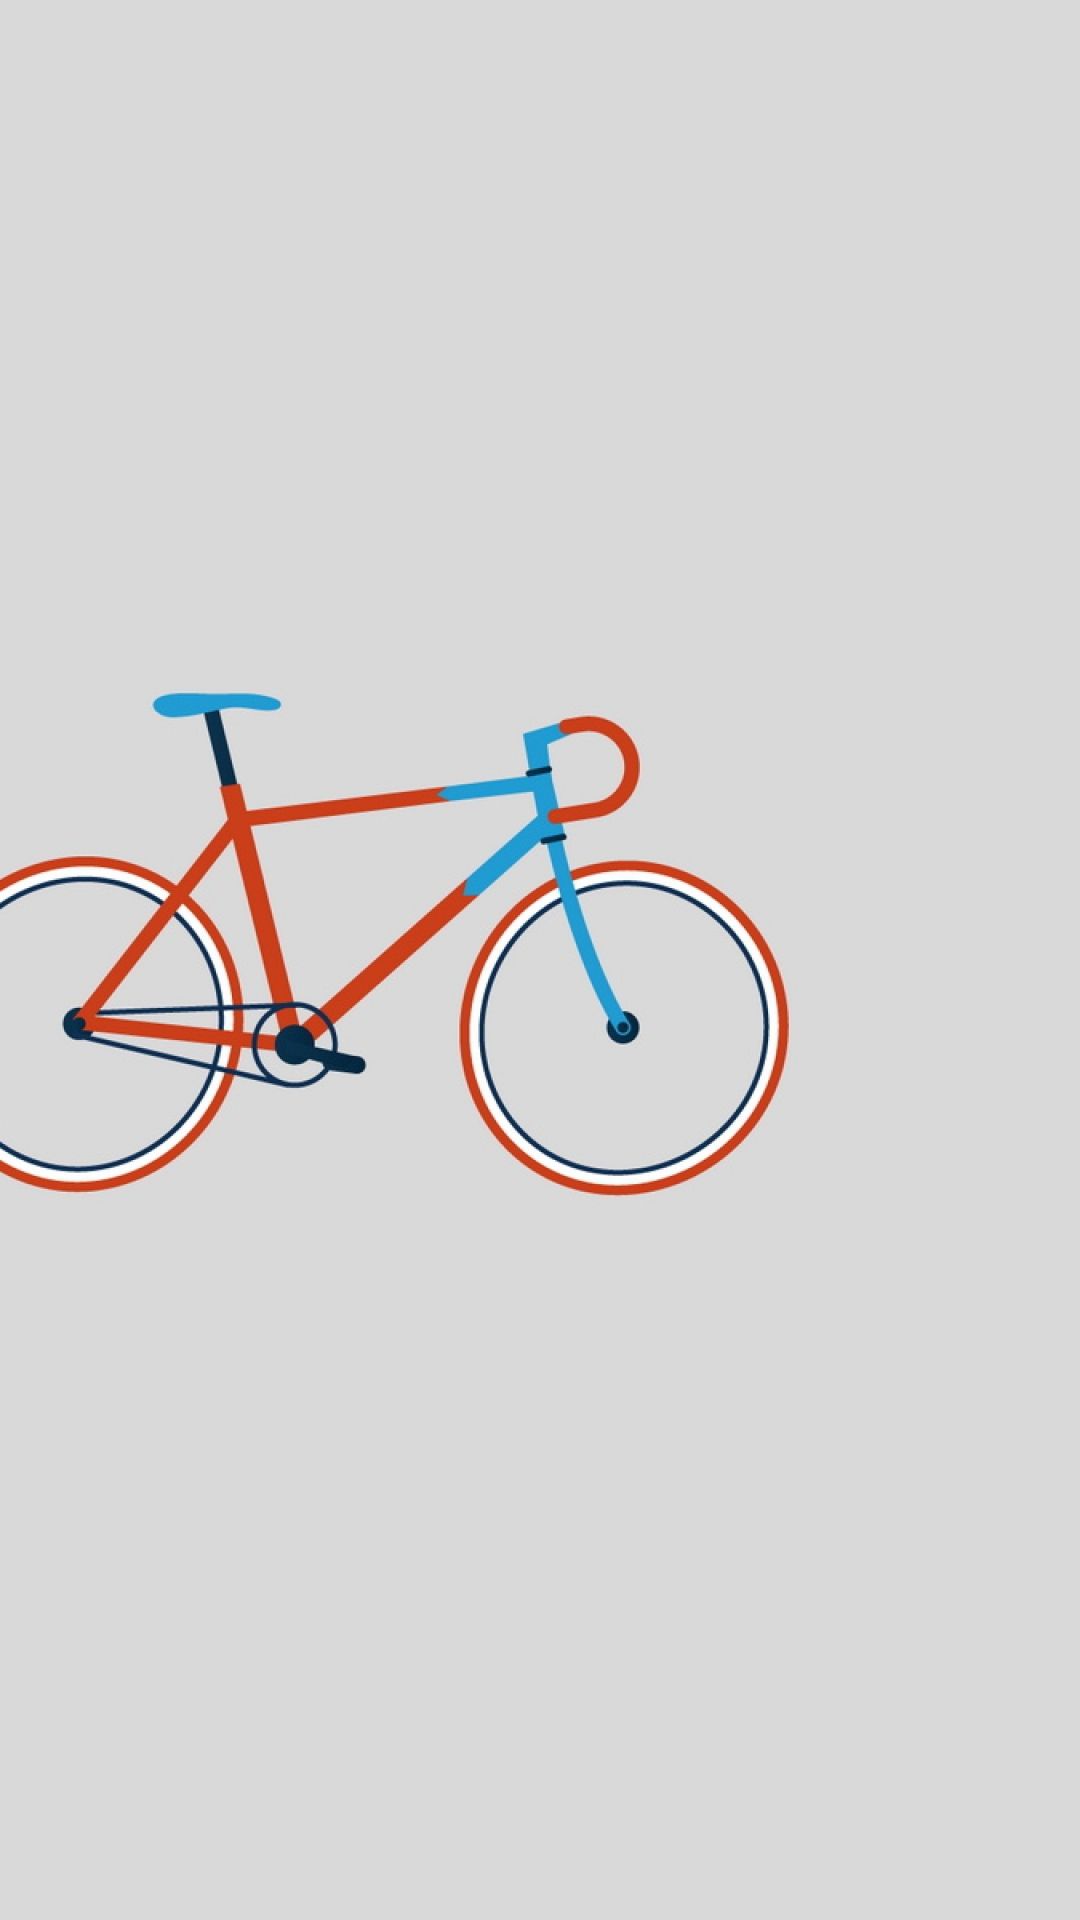 1080x1920 Bicycle Minimalist | Hipster wallpaper Iphone wallpaper hipster Iphone wallpaper tumblr hipster